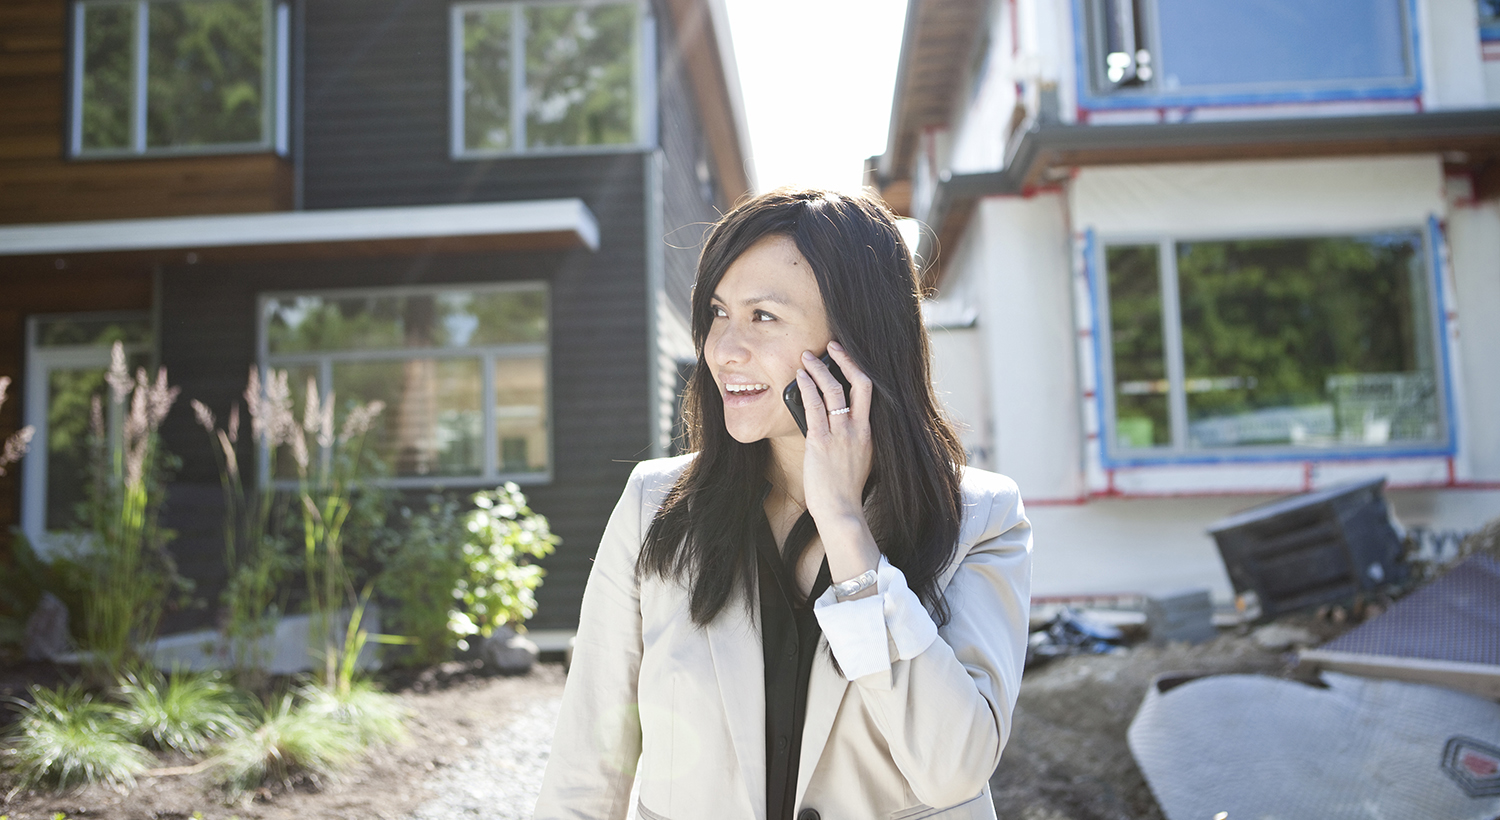 Real estate agent standing near house talking on cell phone